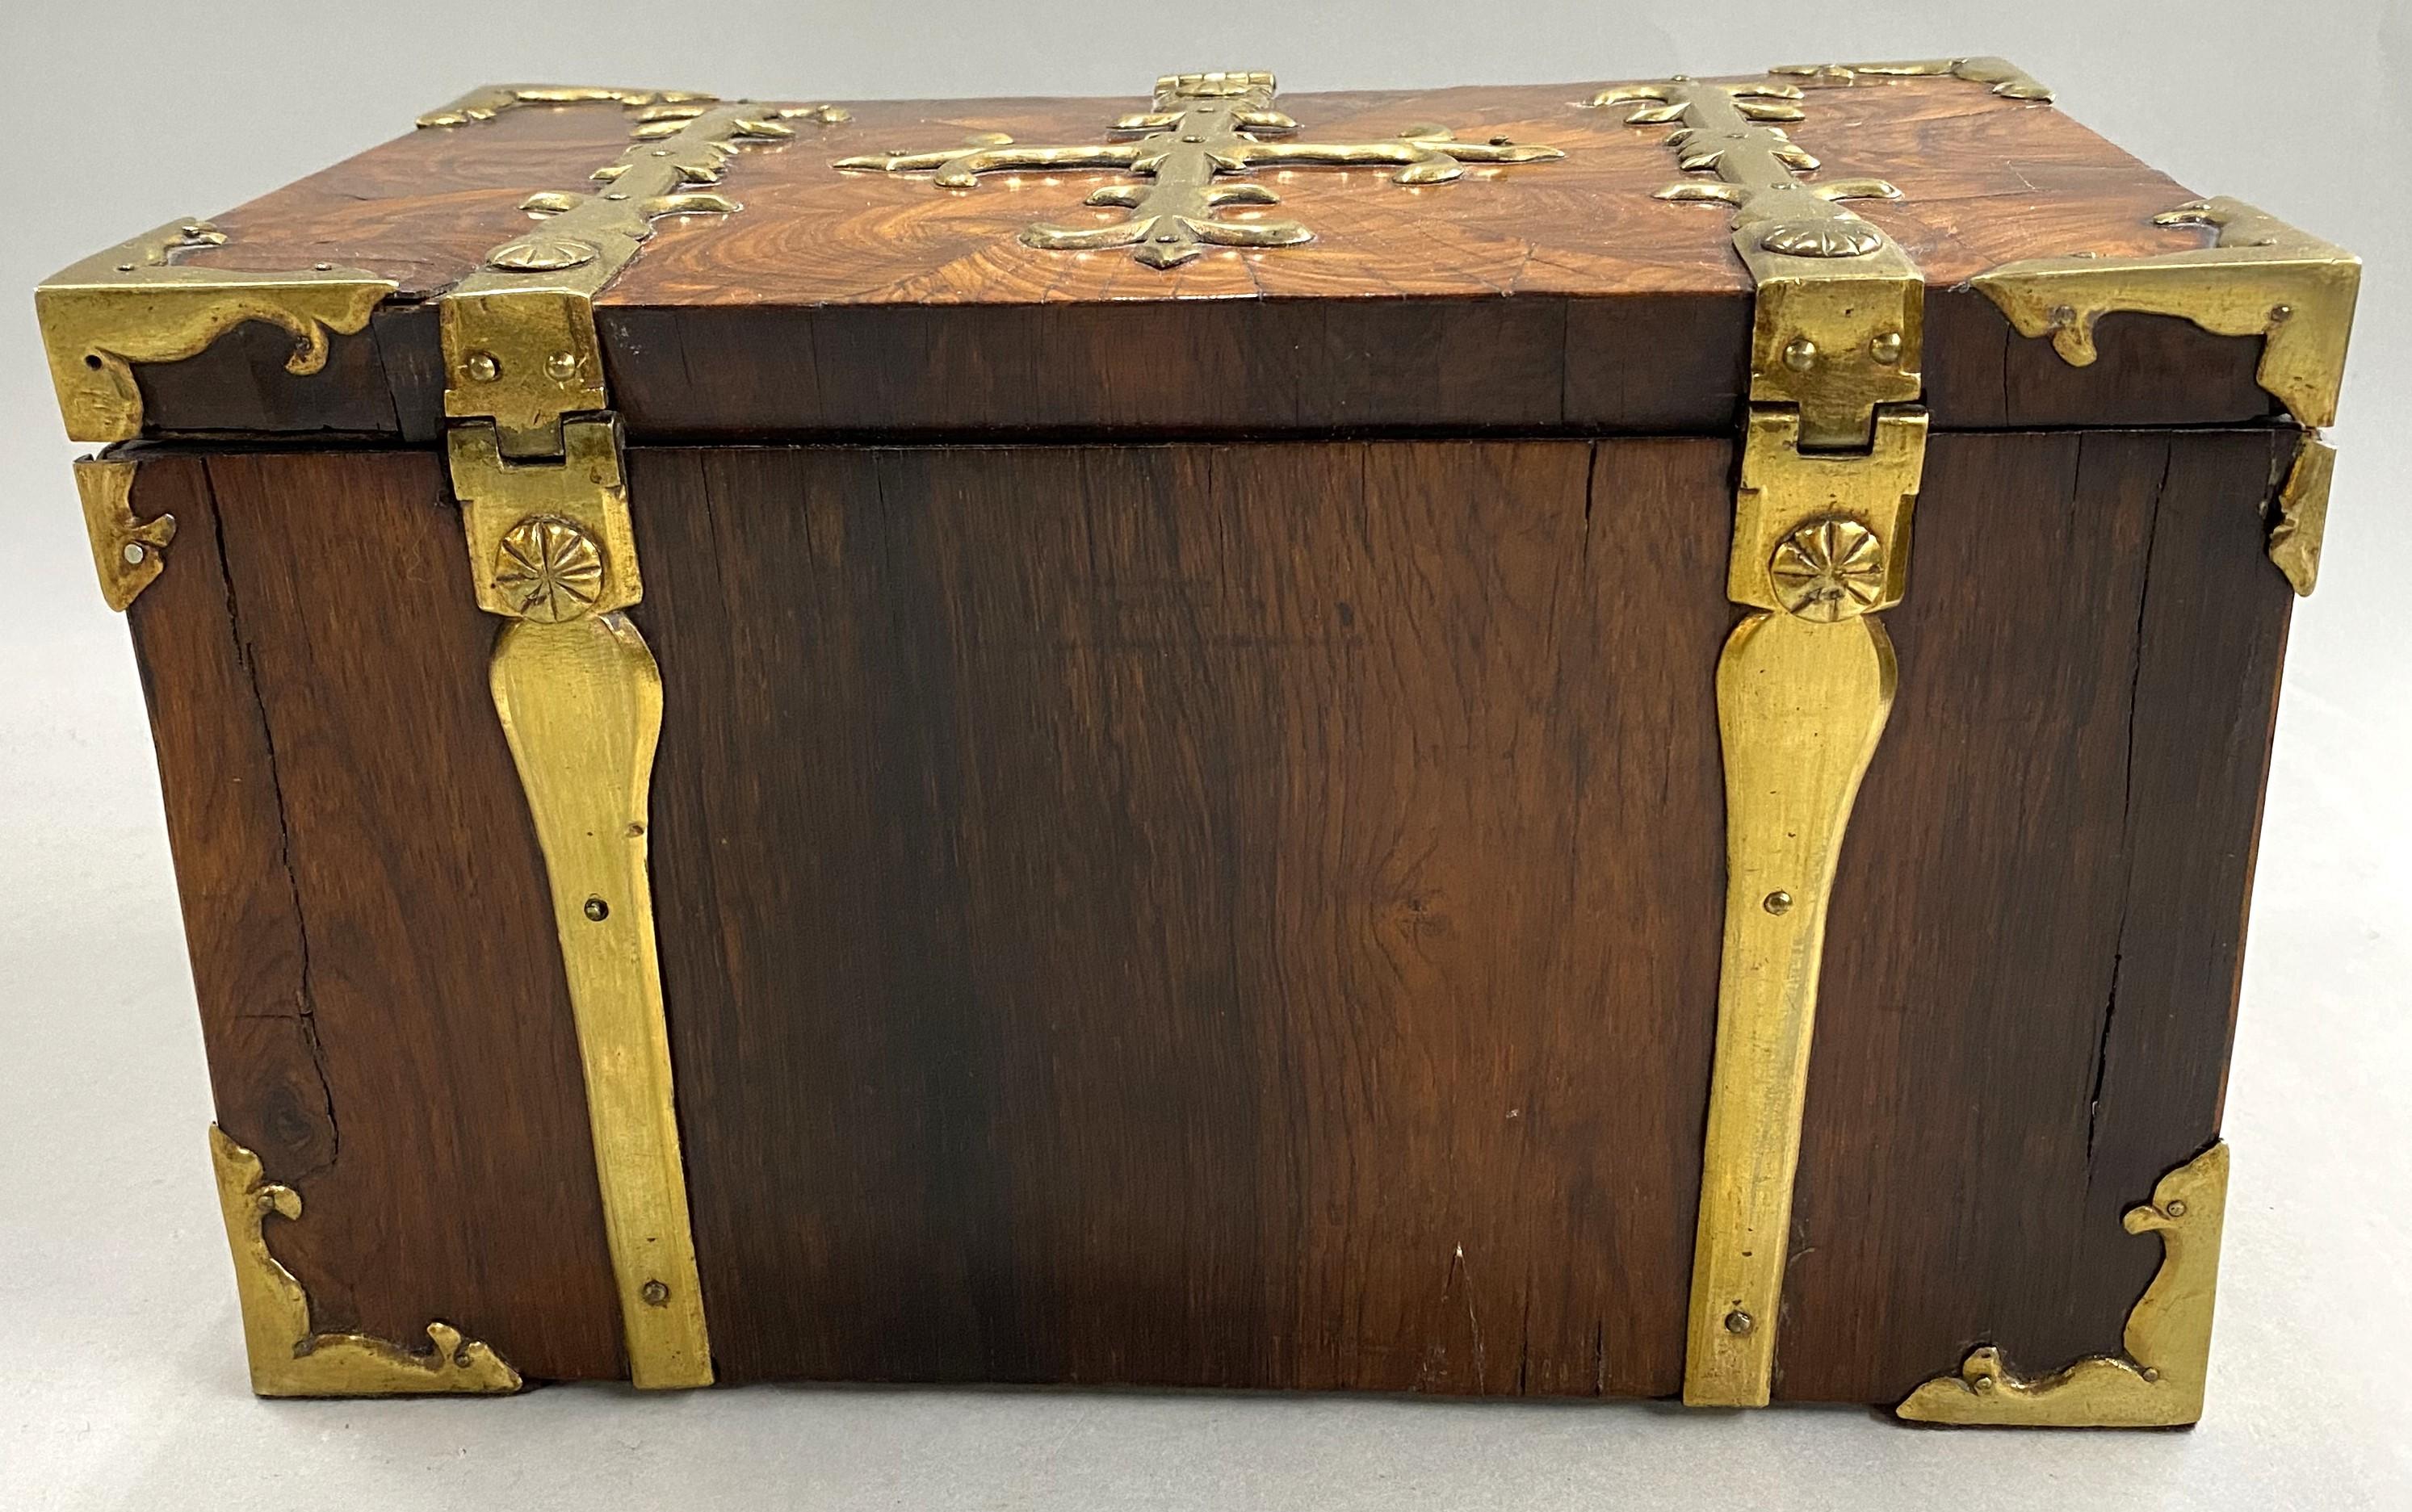 Rare 17th Century English Coffre Fort or Strong Box, circa 1690 In Good Condition For Sale In Milford, NH